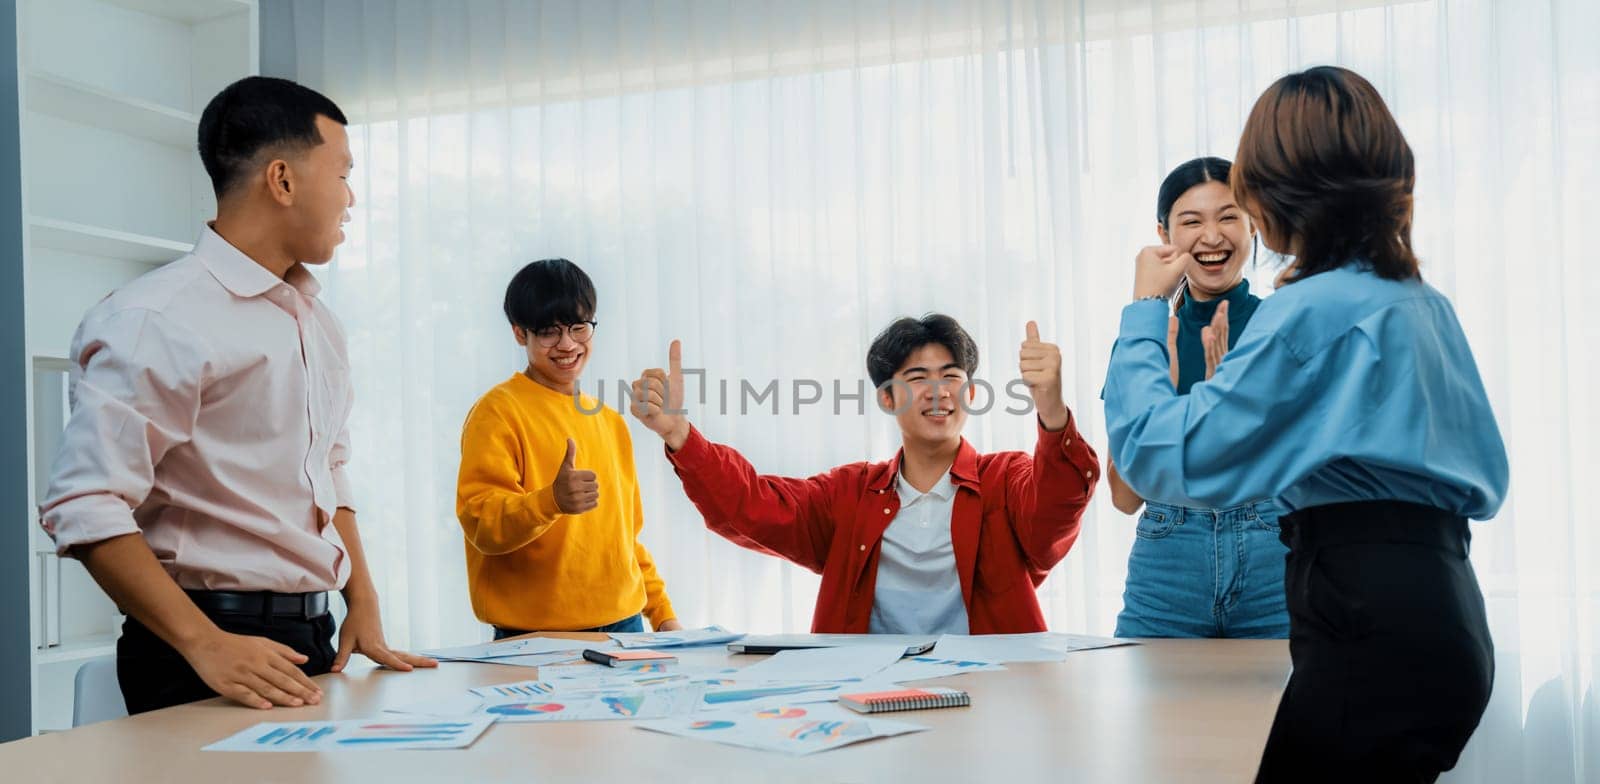 Excited and happy startup company employee celebrate after make successful strategic business marketing planning. Teamwork and positive attitude create productive and supportive workplace. Synergic